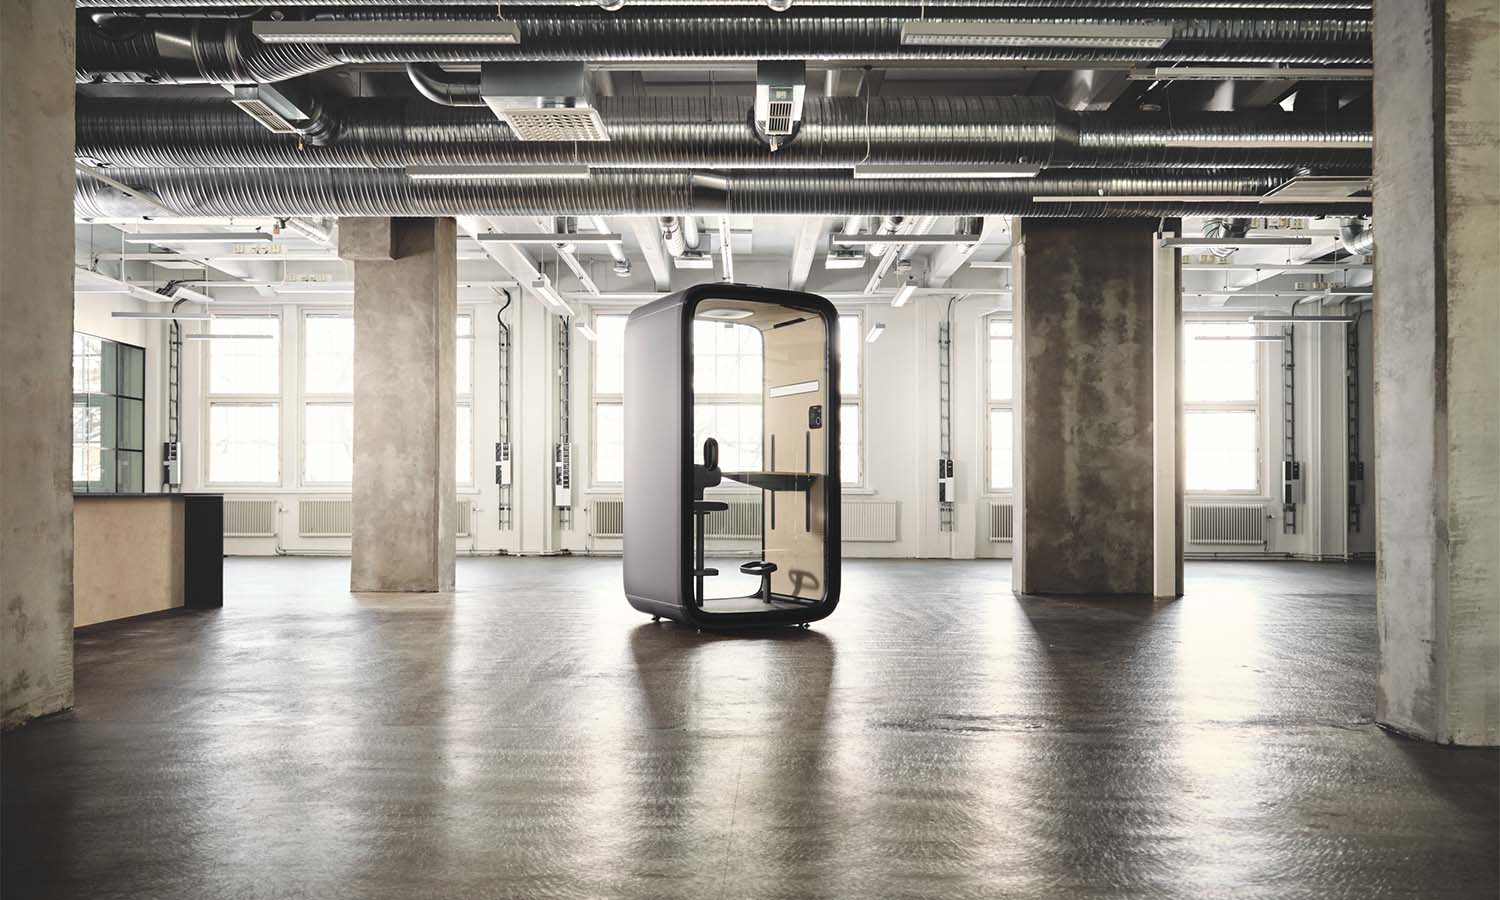 White Framery One soundproof office pod in a wide open space.